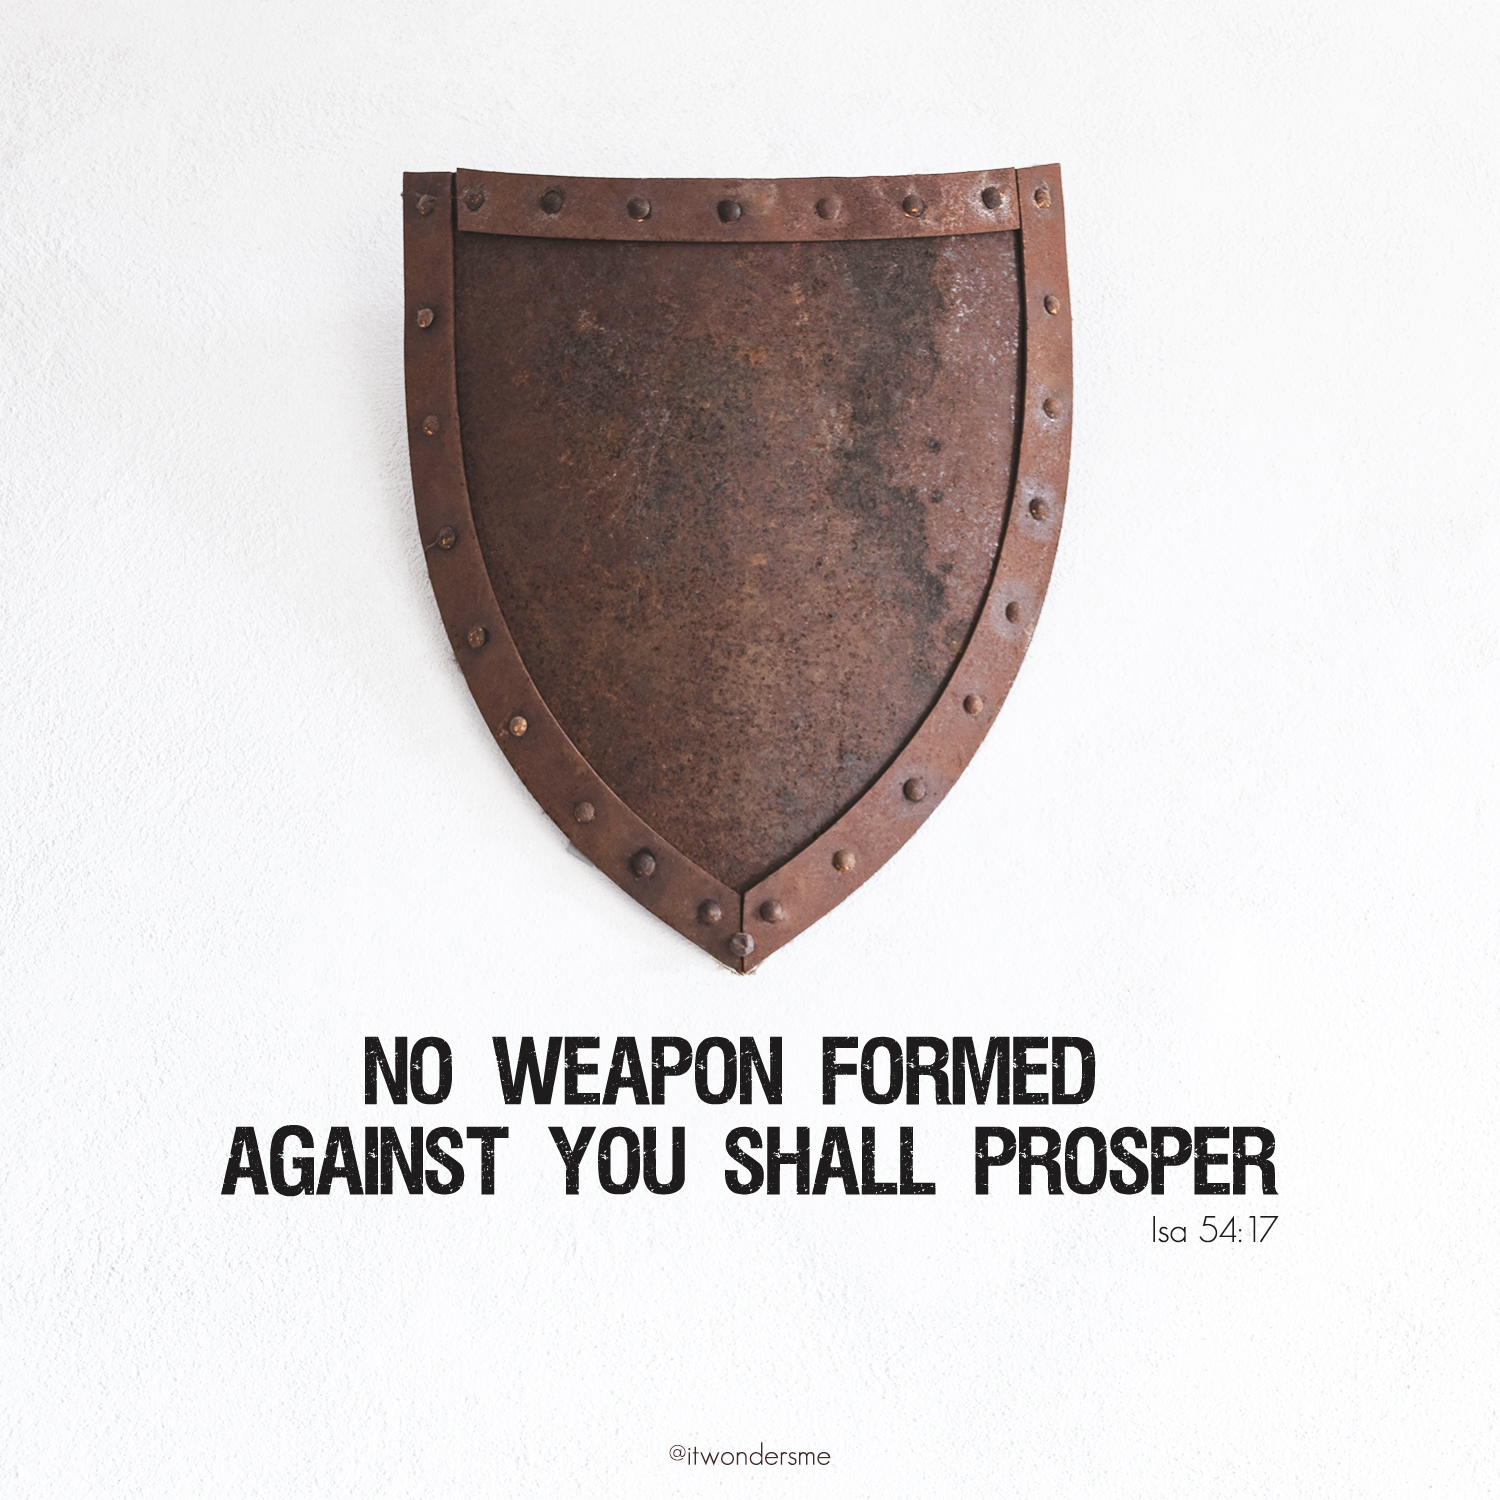 No weapon formed against you shall prosper